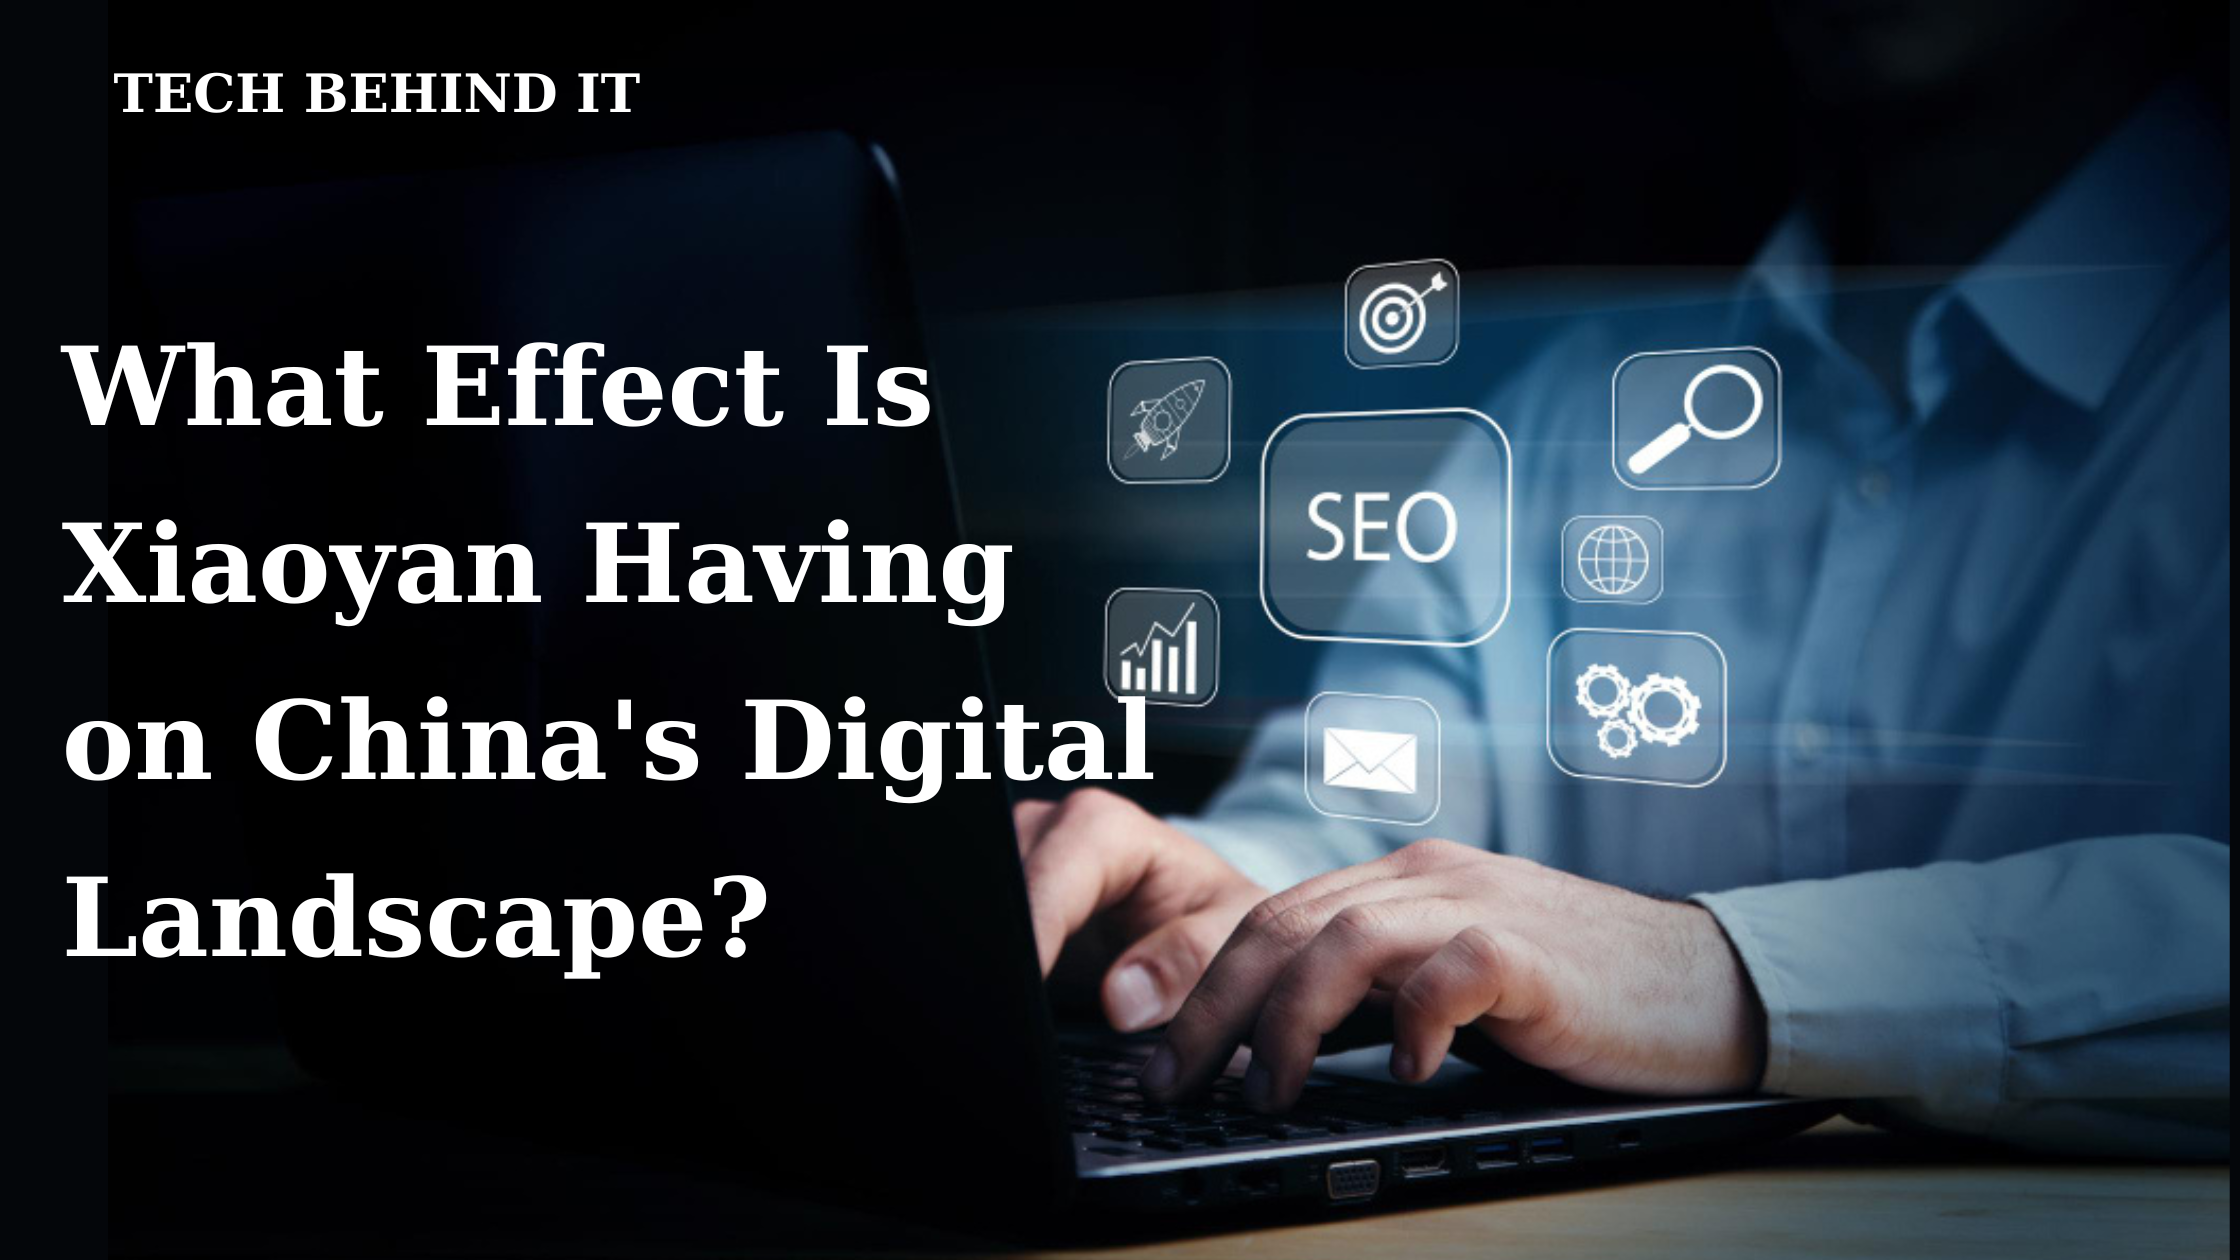 What Effect Is Xiaoyan Having on China's Digital Landscape?